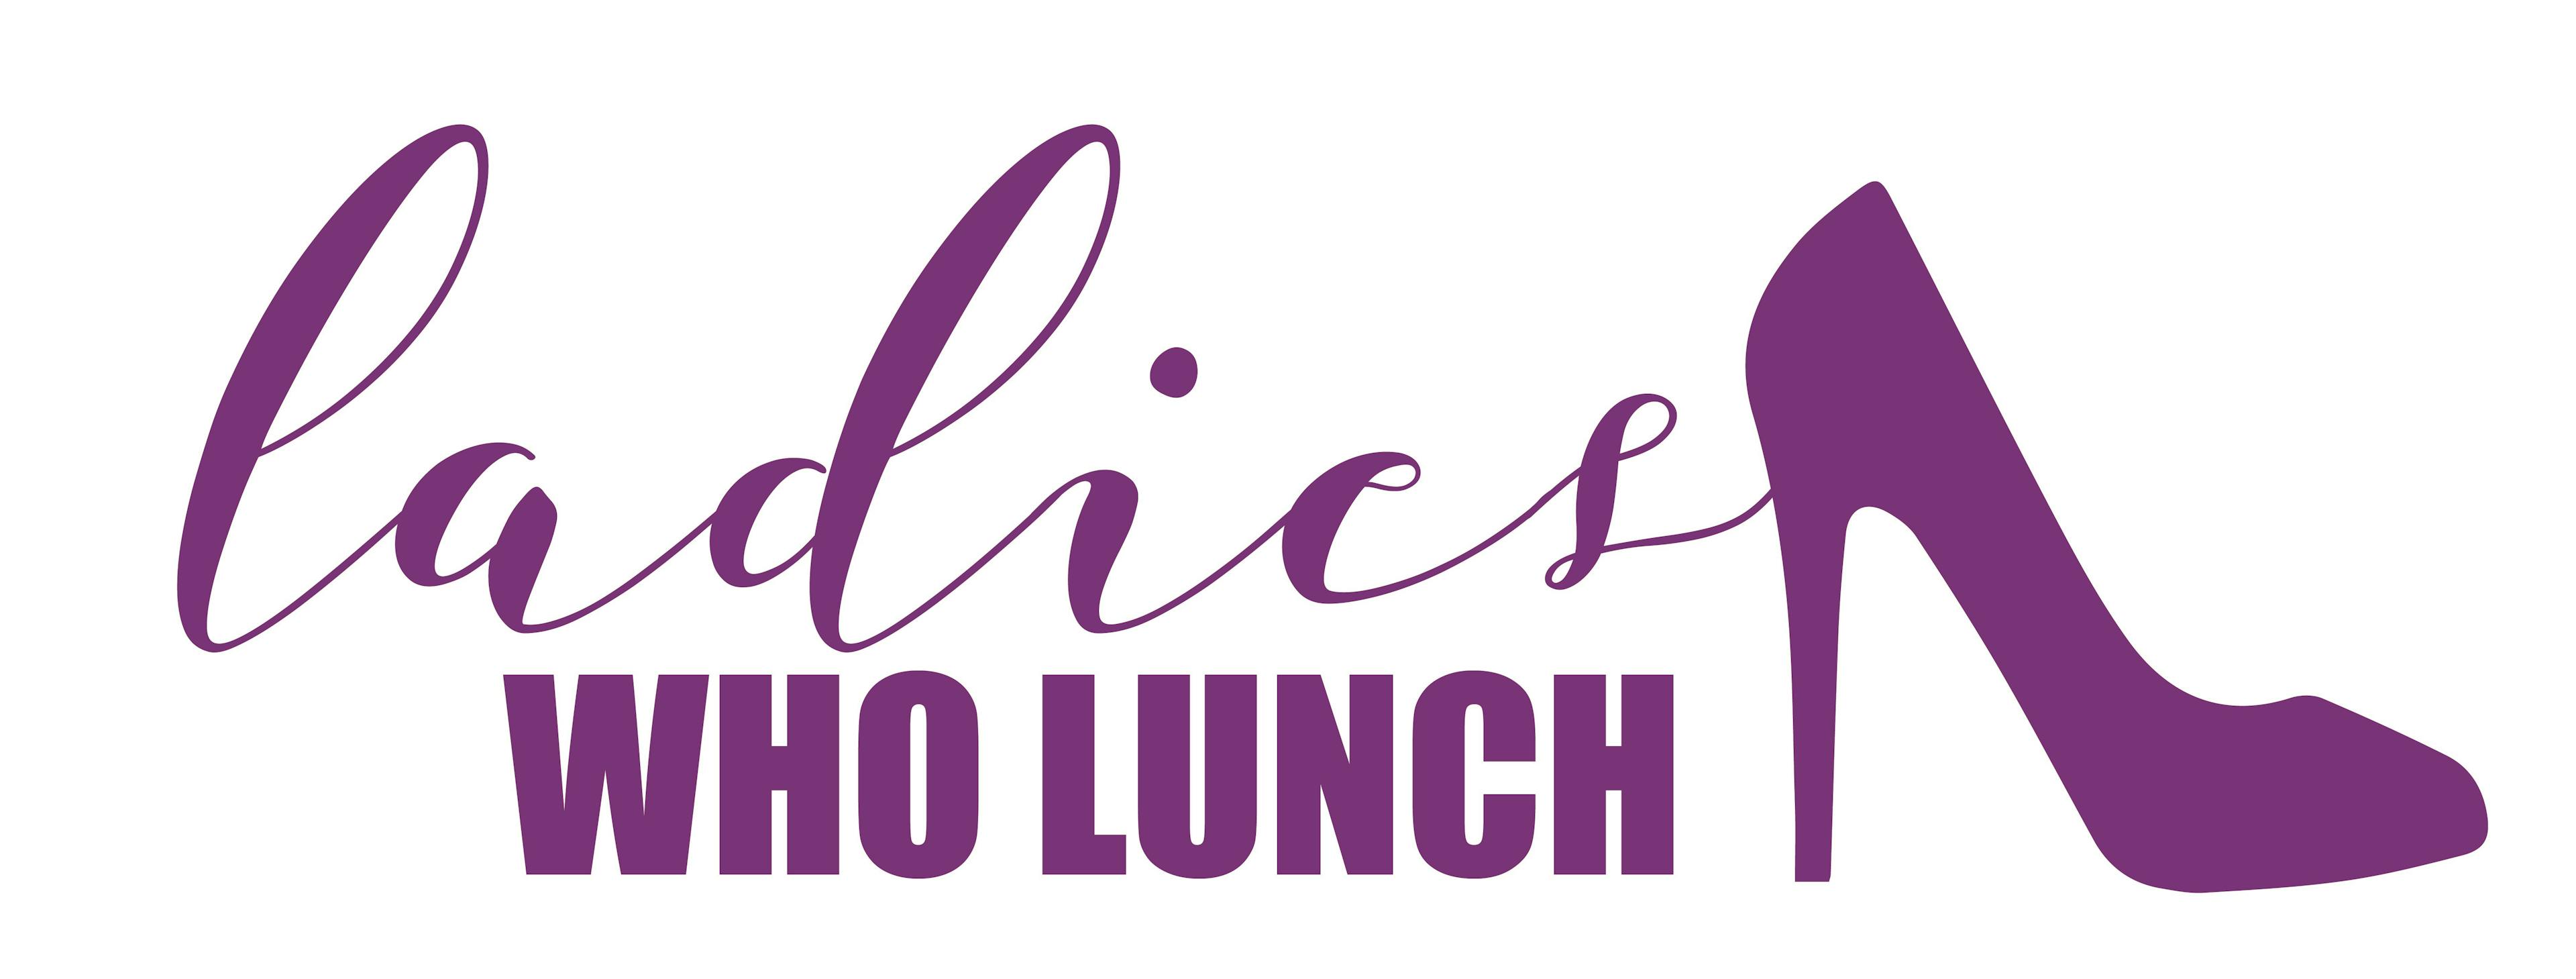 Ladies Who Lunch logo